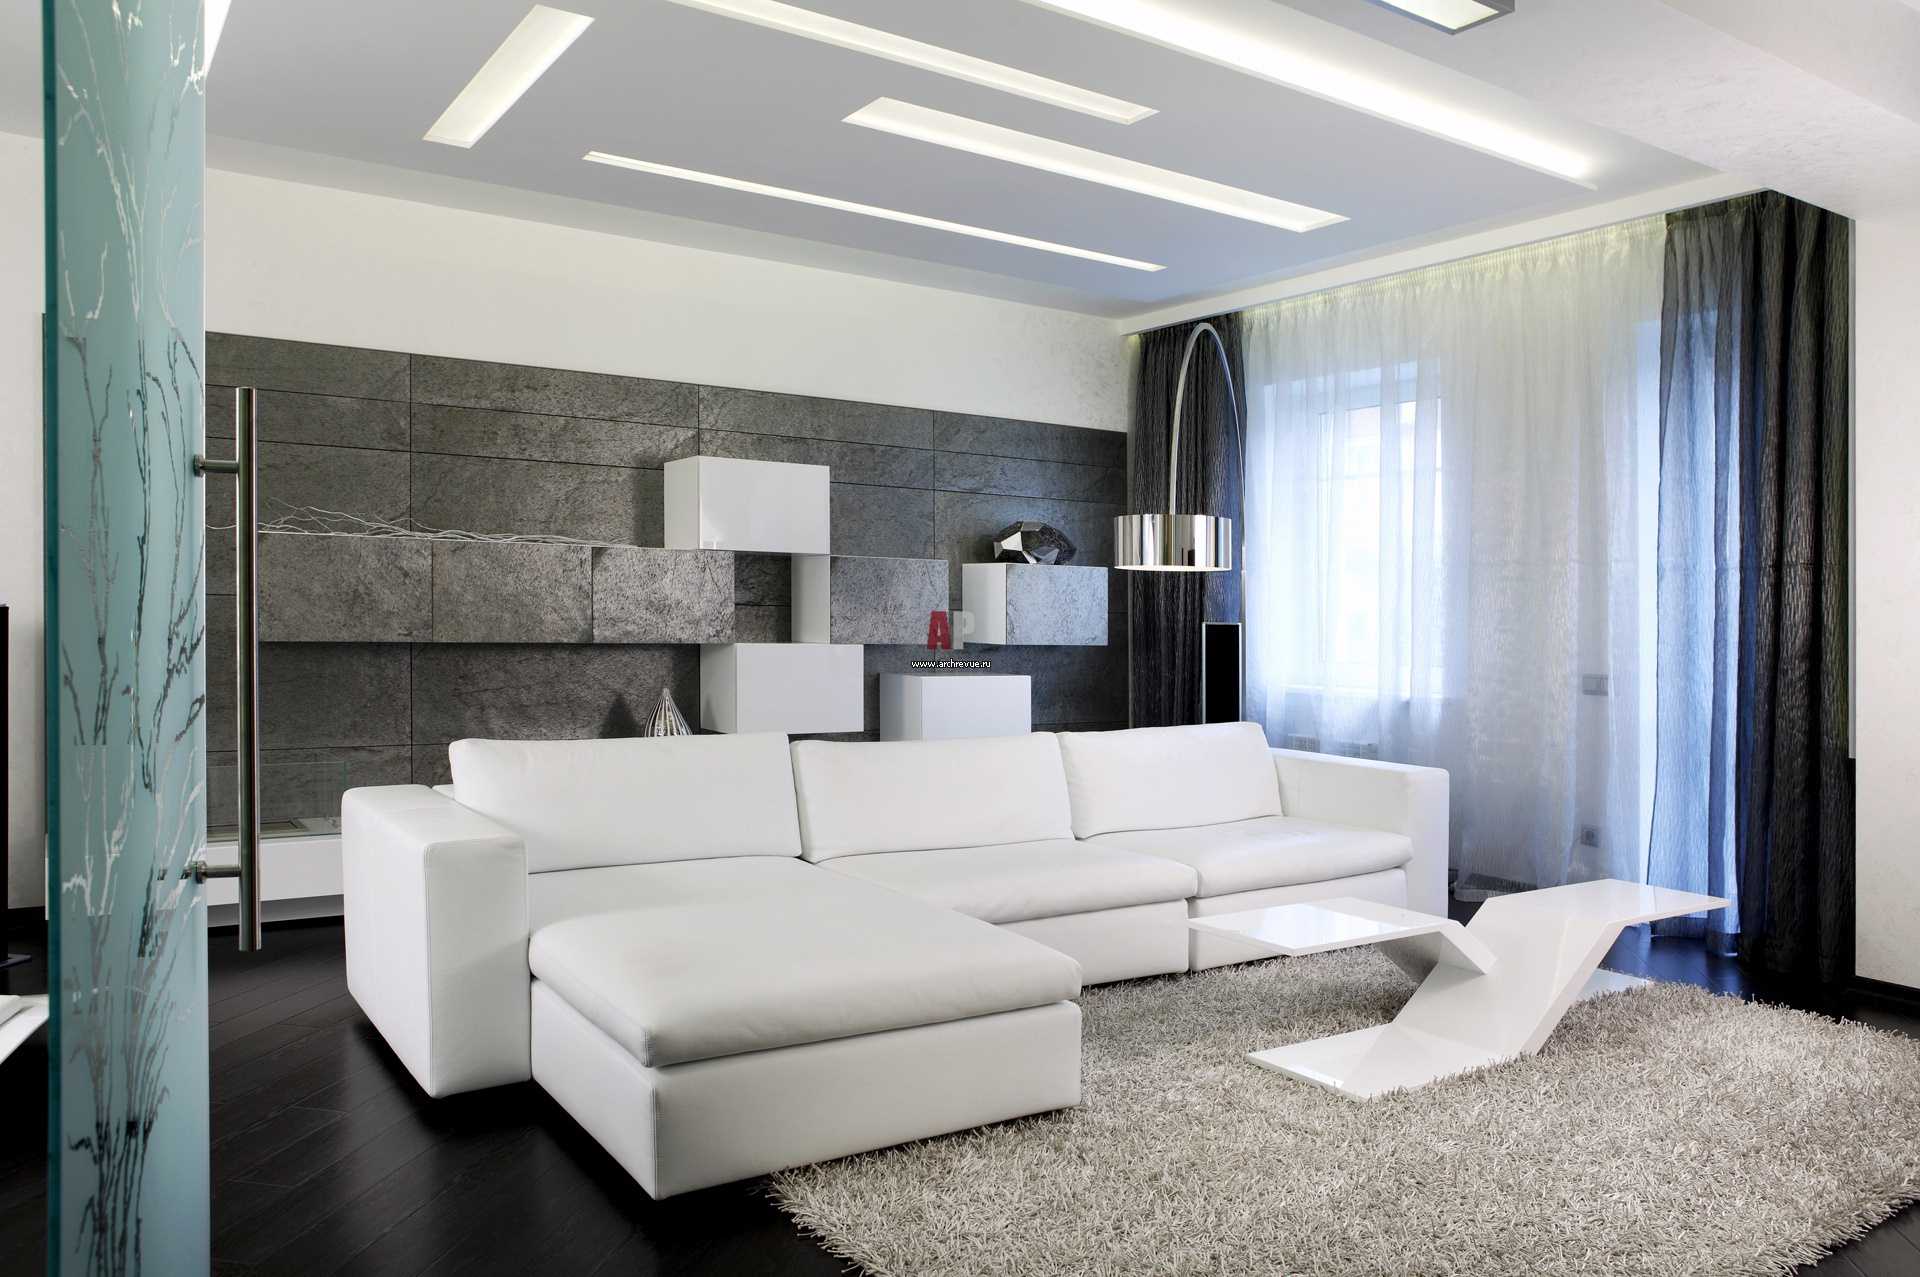 light white furniture in the design of the hallway